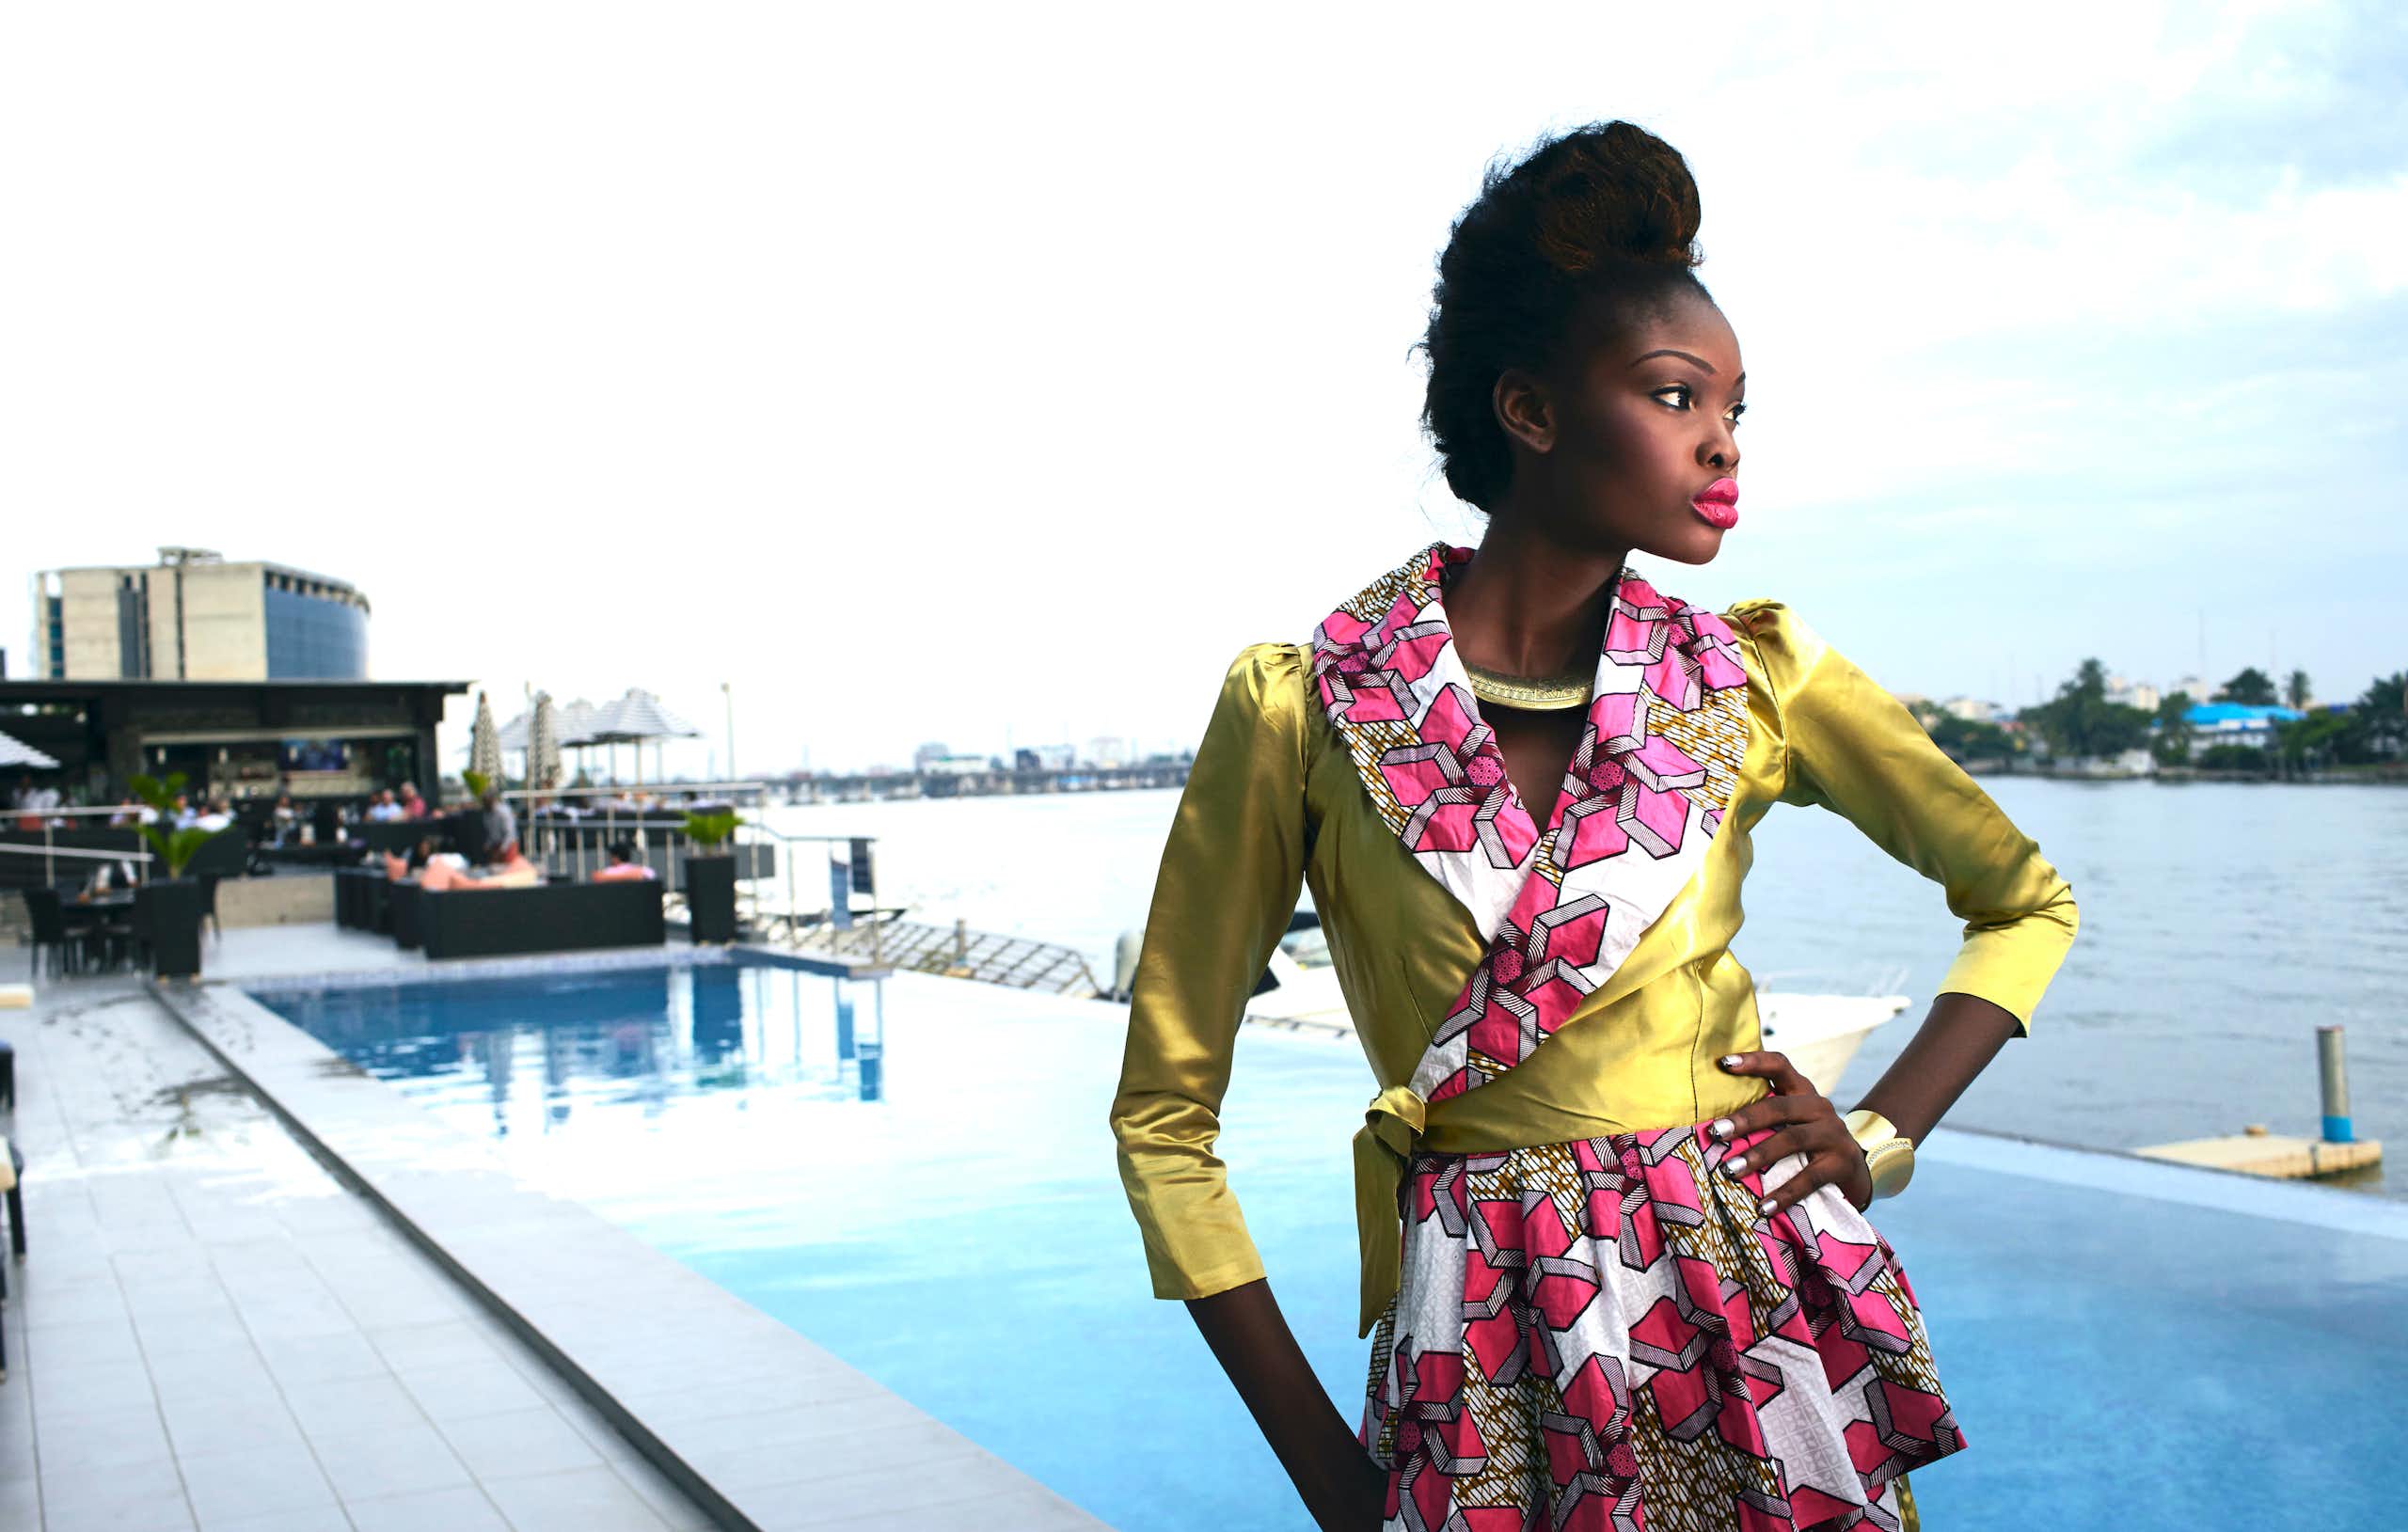  A young woman stands at a waterfront pool with an arm on her hip, posing in an outfit of shiny green with pink African fabric contrasting it on the collar and skirt. 